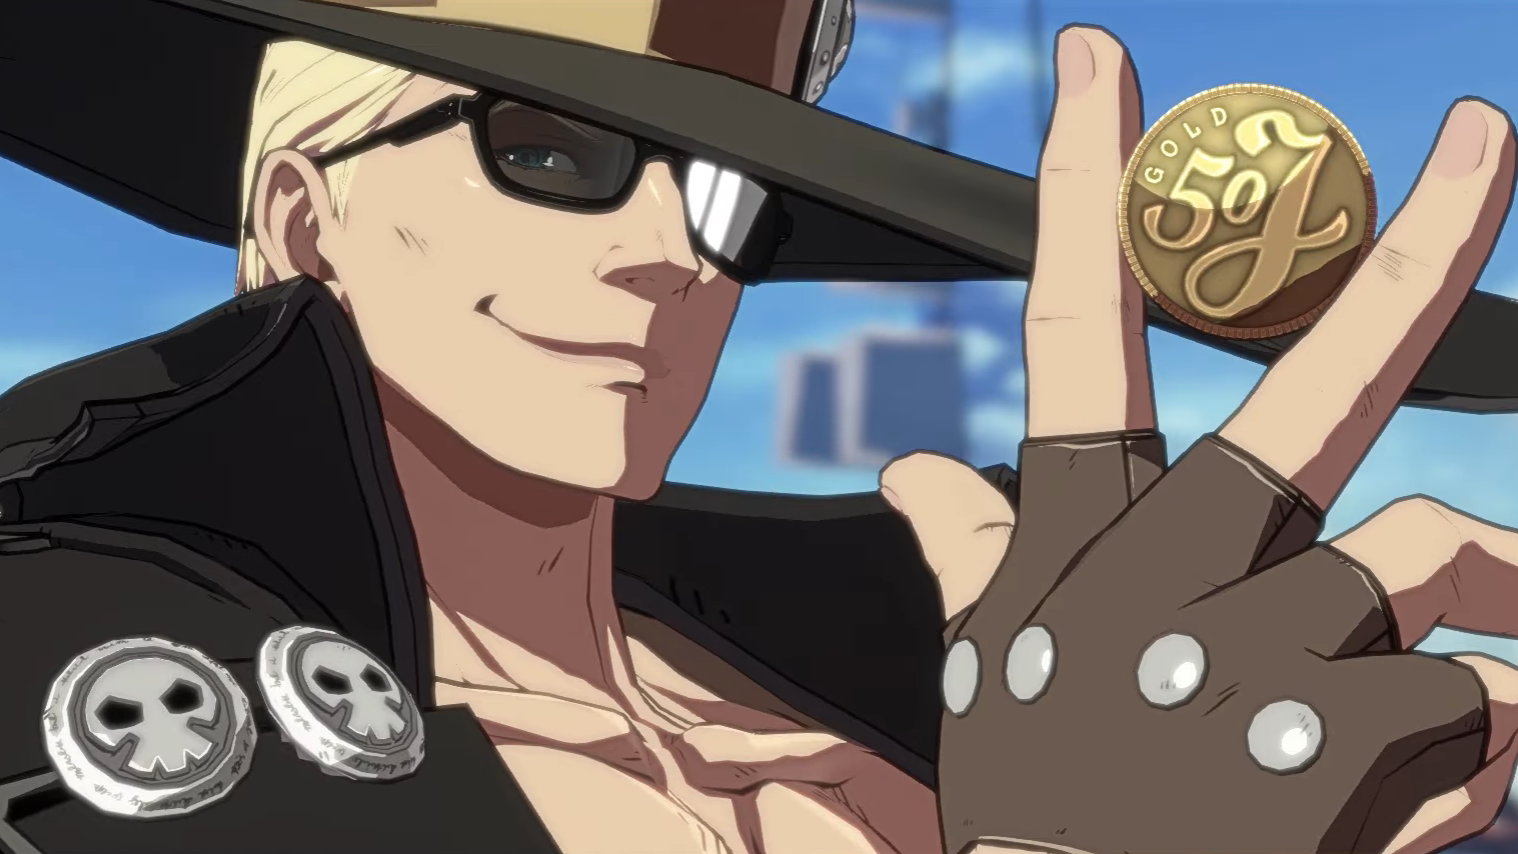 Guilty Gear Strive Announces First Season 3 DLC Character, Johnny, Releasing This Month